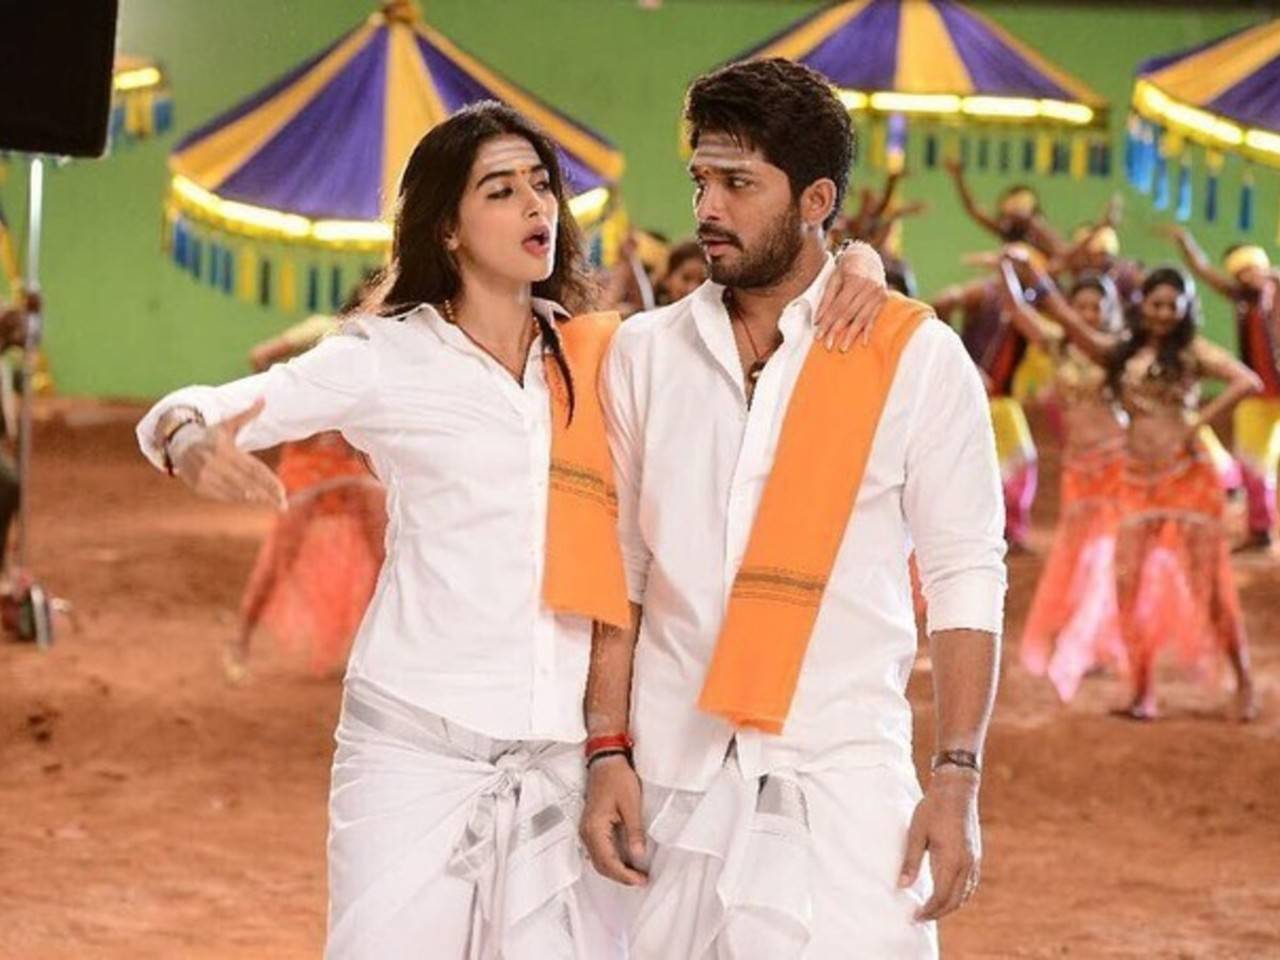 Pooja Hegde shares fun throwback pictures with Allu Arjun from the sets of  DJ | Telugu Movie News - Times of India